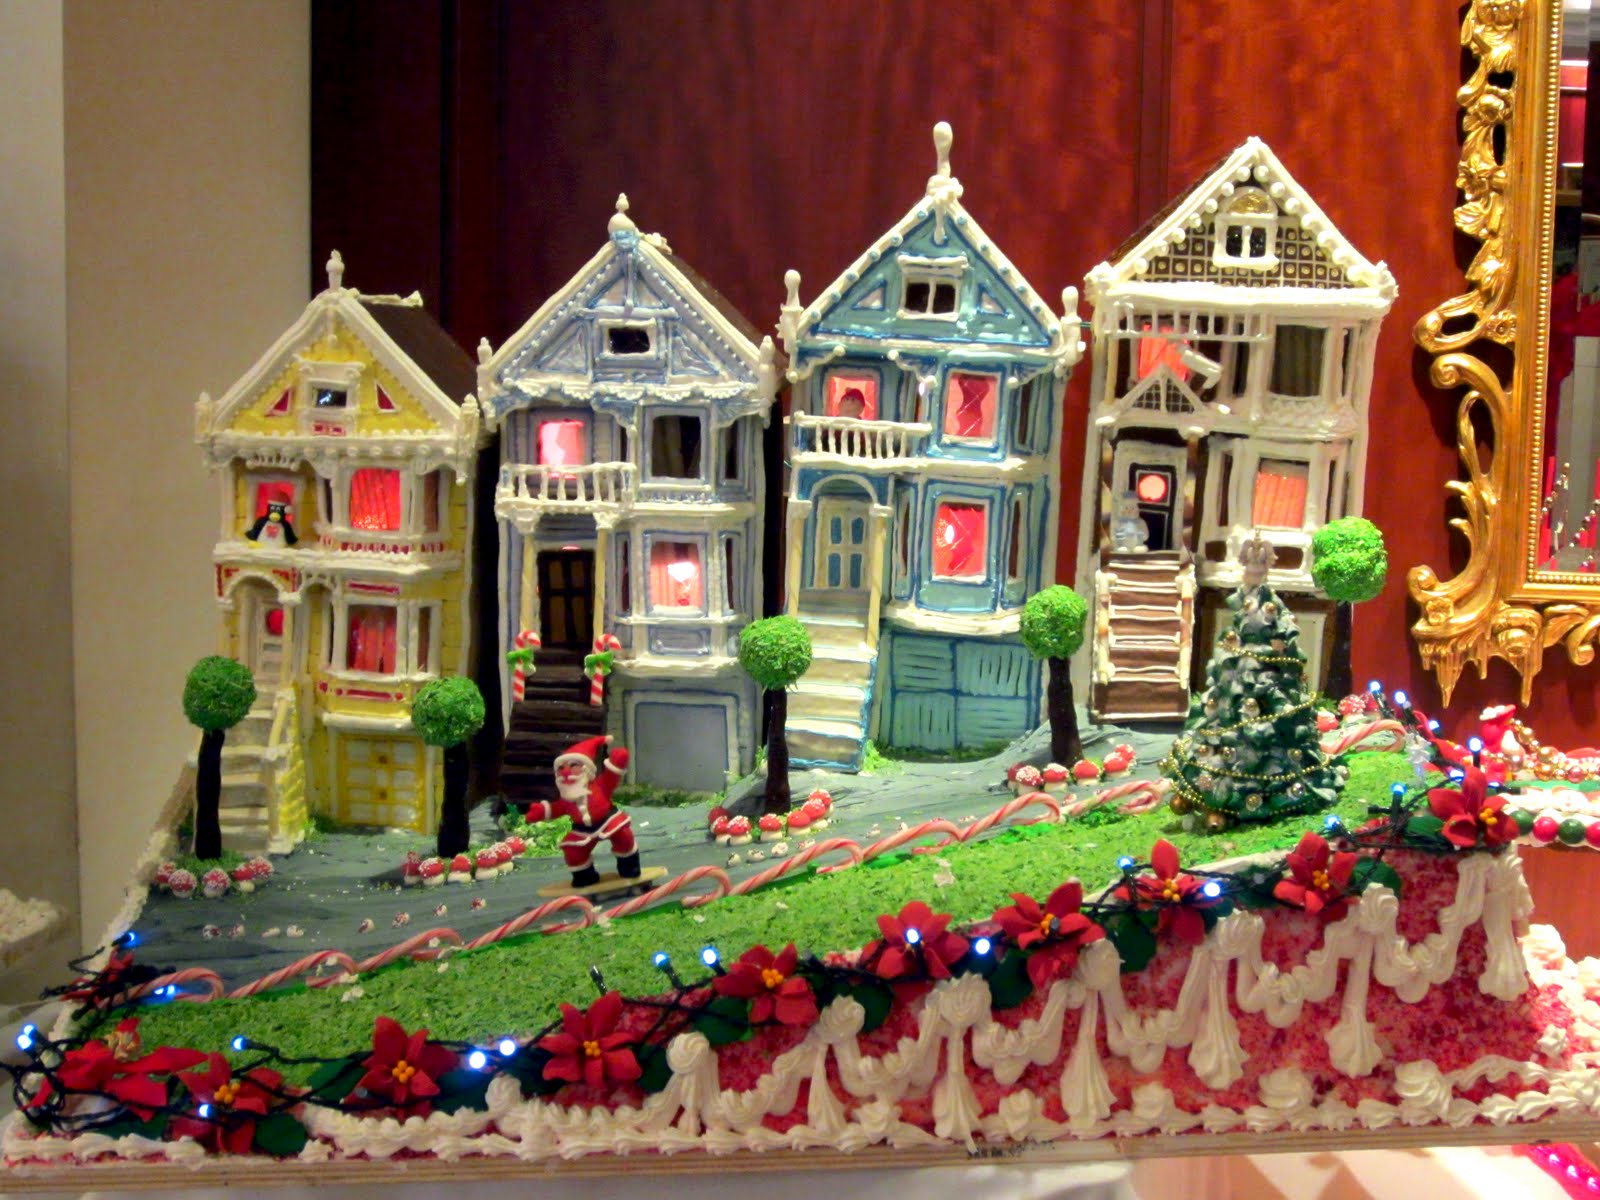 San Francisco's Painted Ladies Gingerbread House